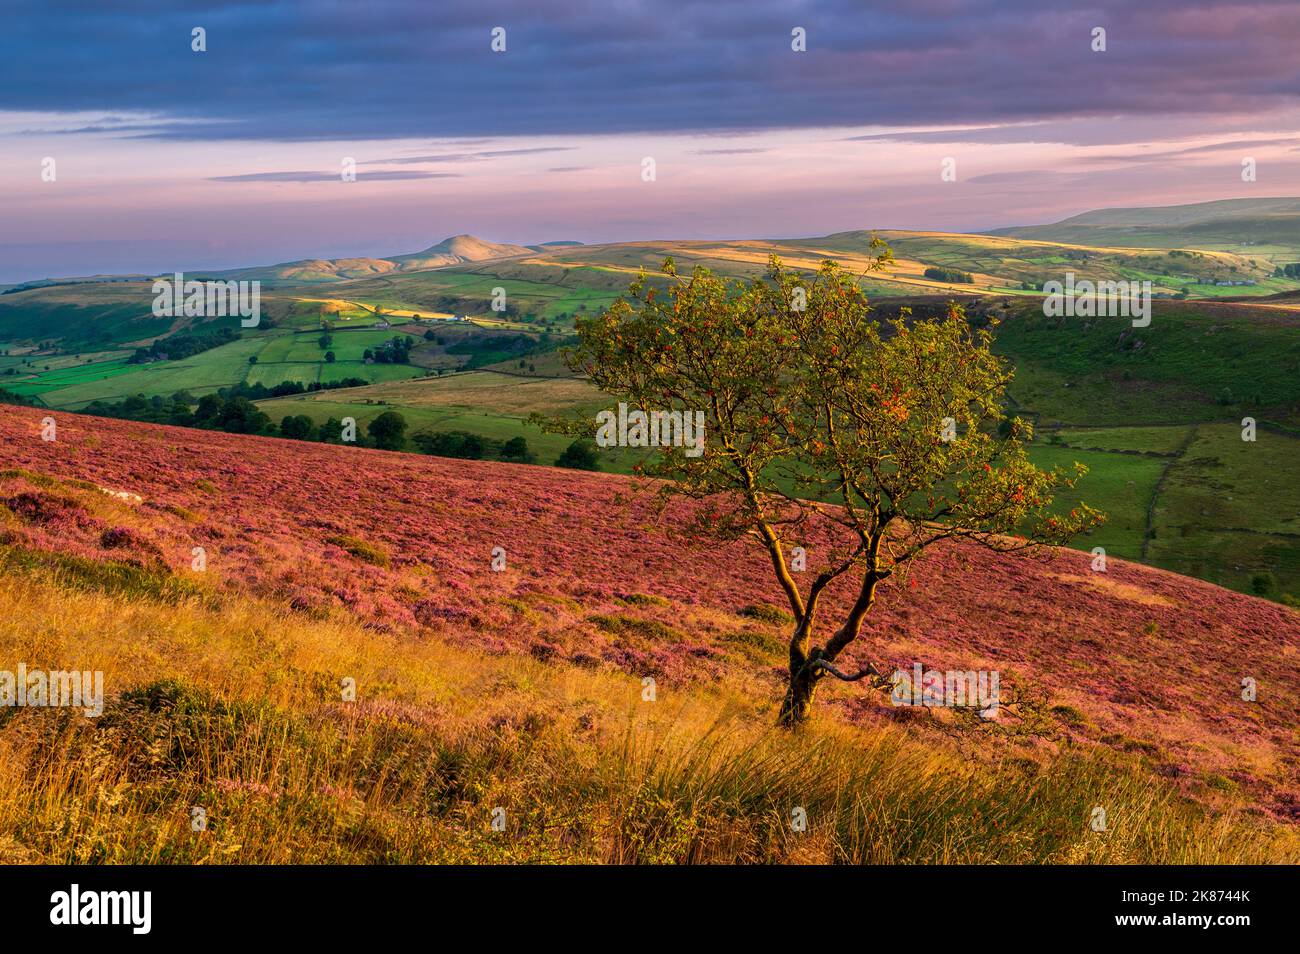 Summer view of Shutlinsloe with carpet of heather, Wildboarclough, Cheshire, England, United Kingdom, Europe Stock Photo